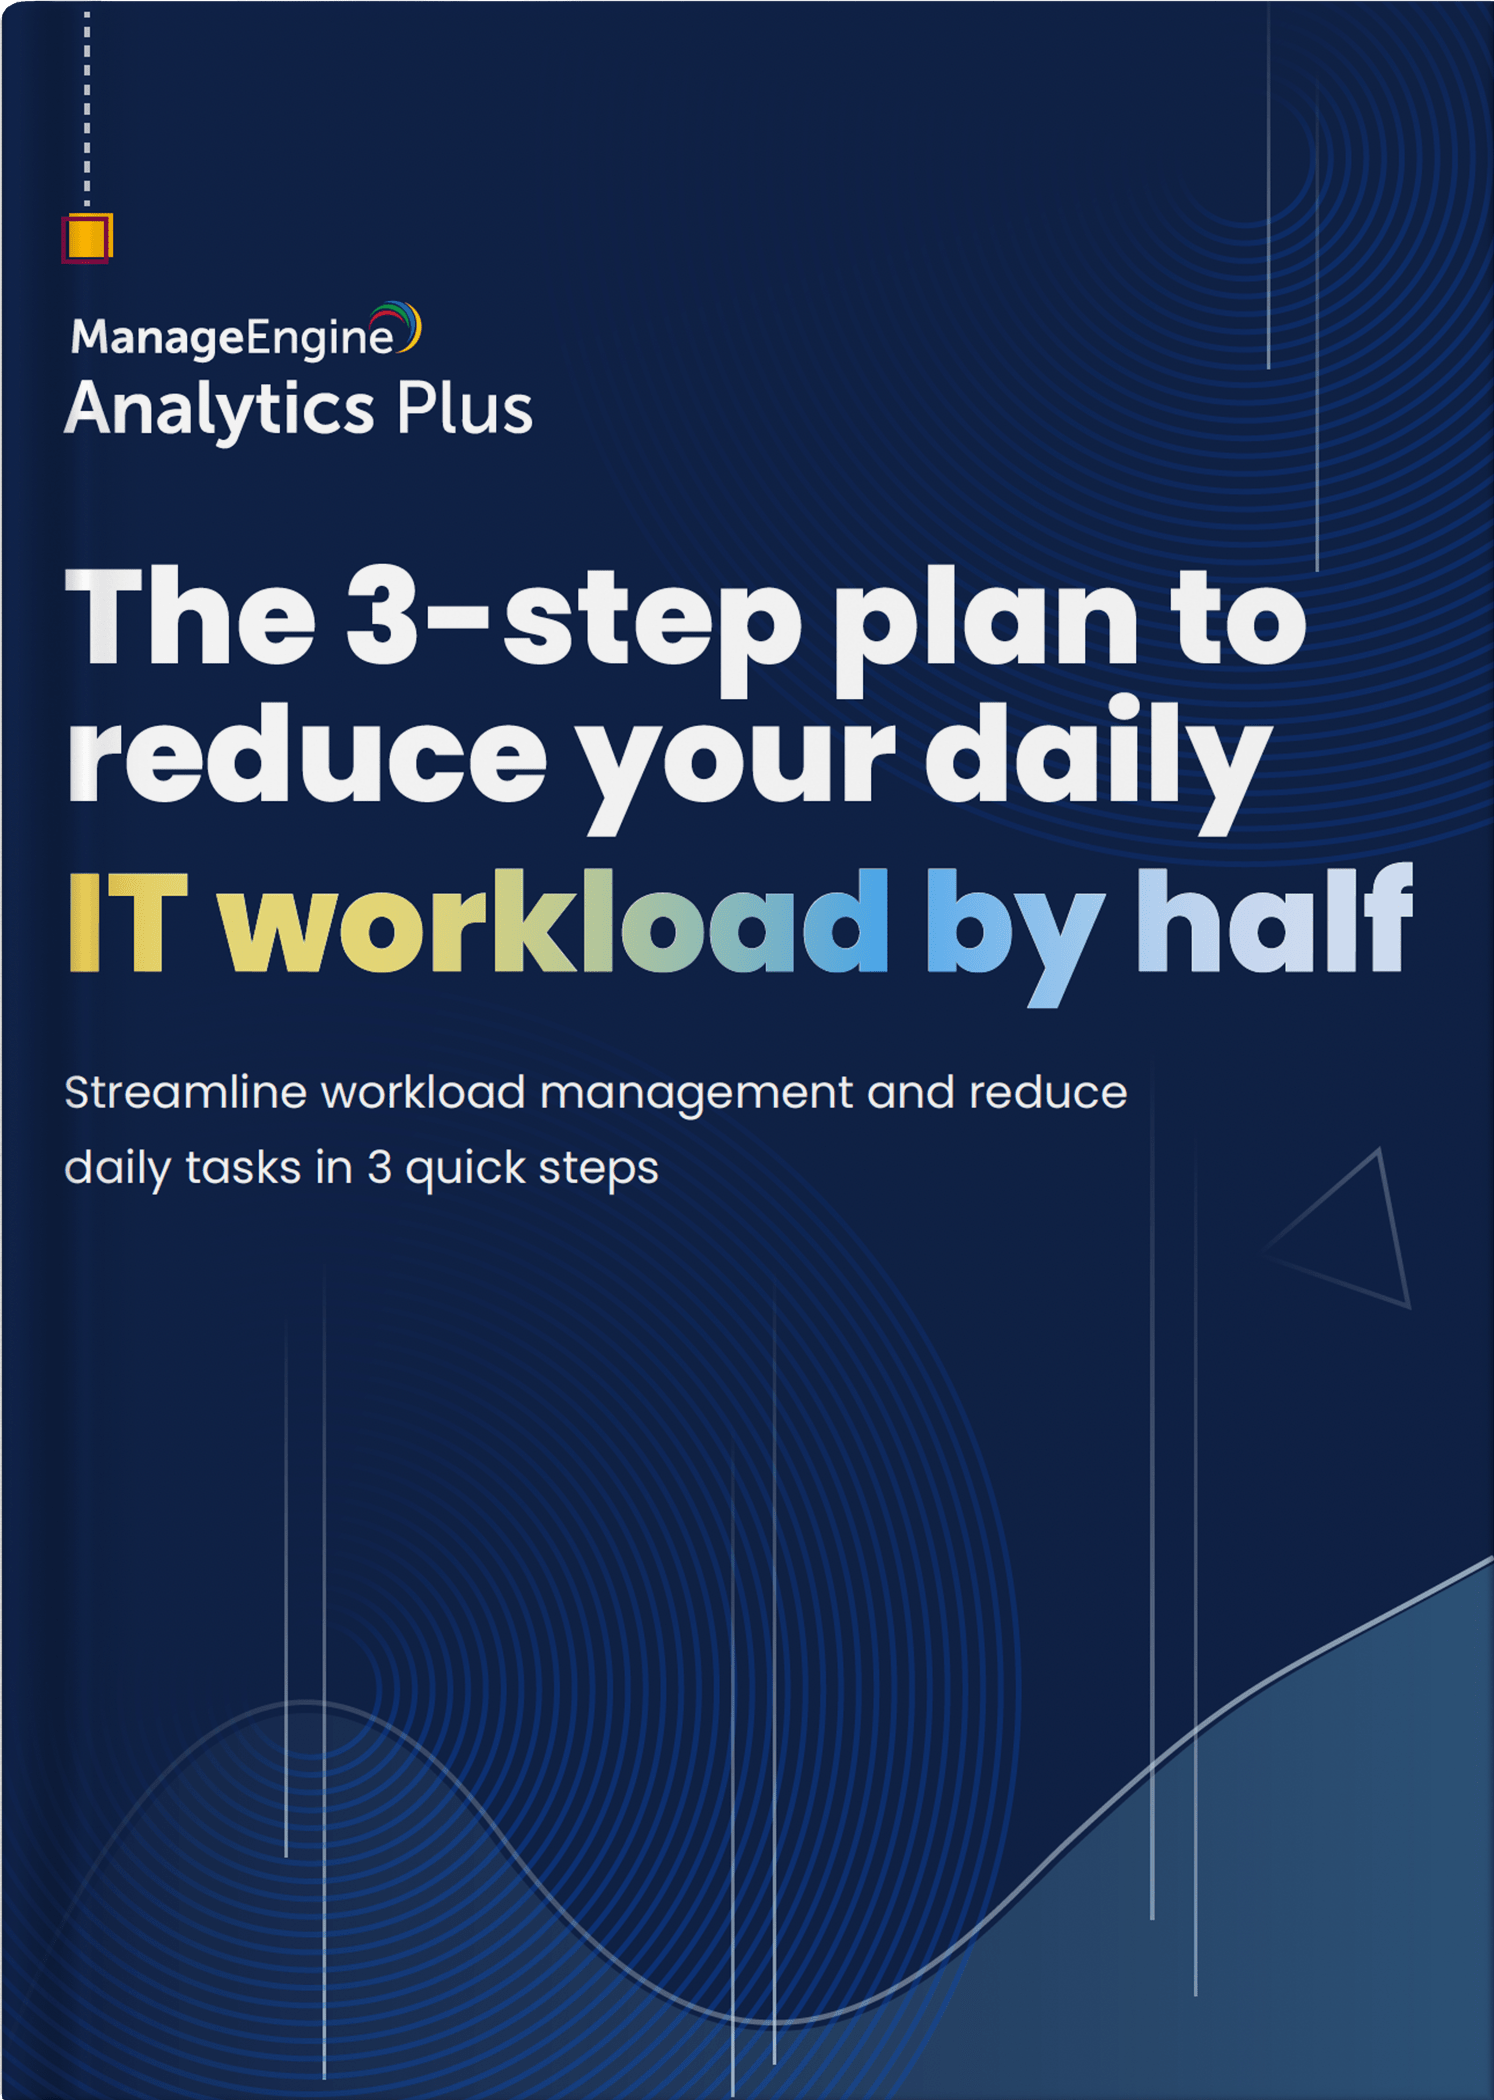 The 3-step plan to reduce your daily IT workload by half 